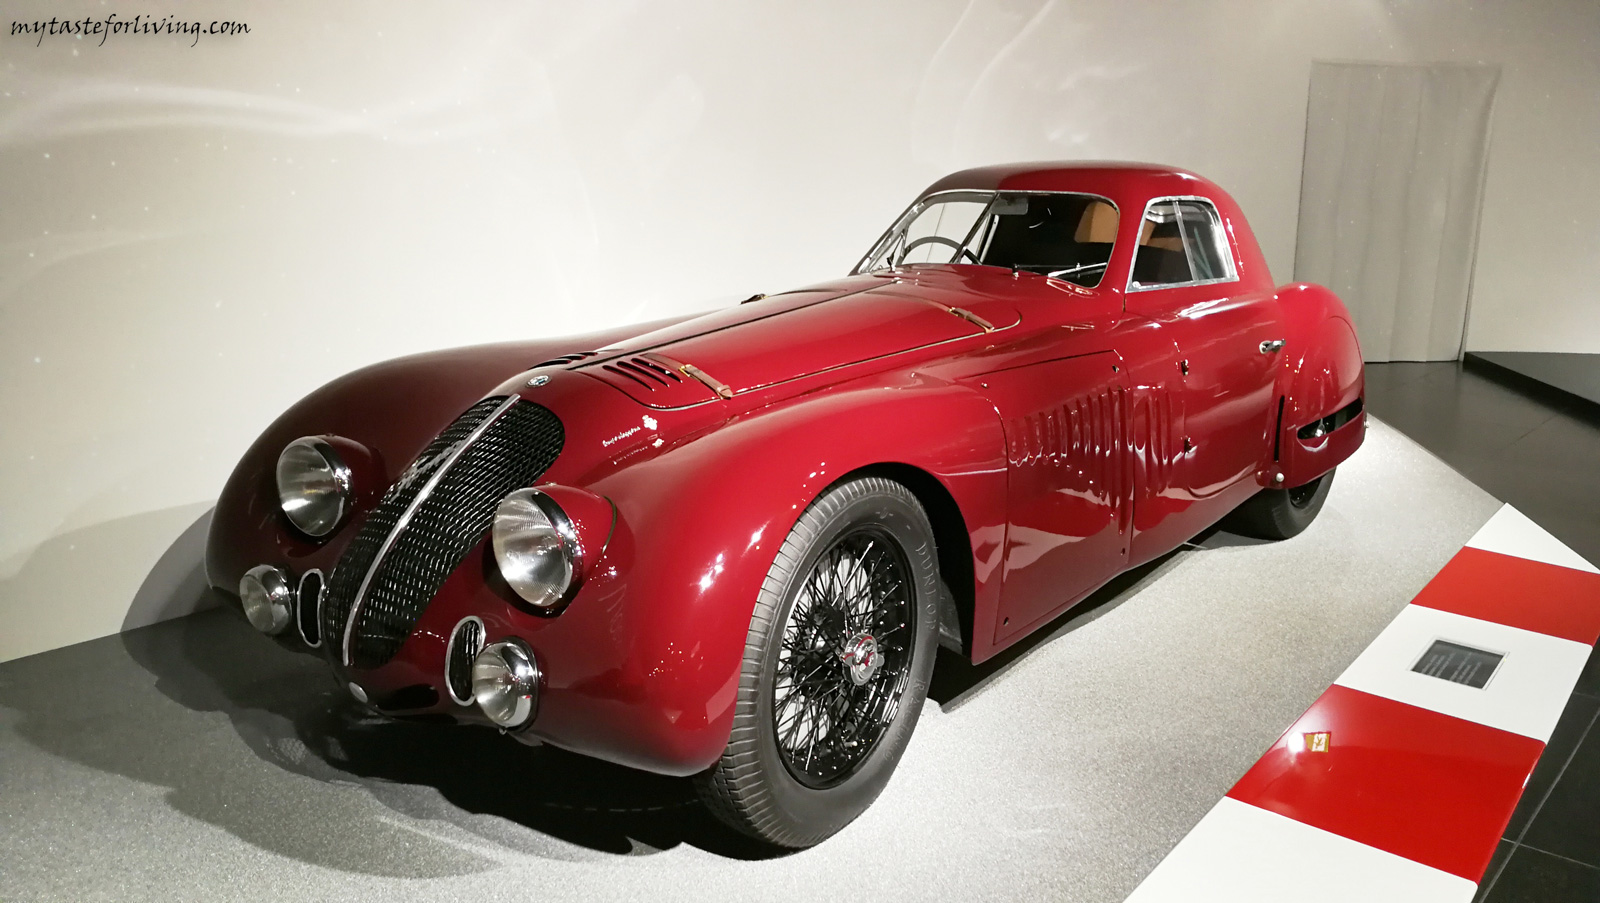 "The Alfa Romeo History Museum" (Museo Storico Alfa Romeo) of the italian automotive company was opened on december 18, 1976. The museum was built in the city of Arese, 12 km from Milan.